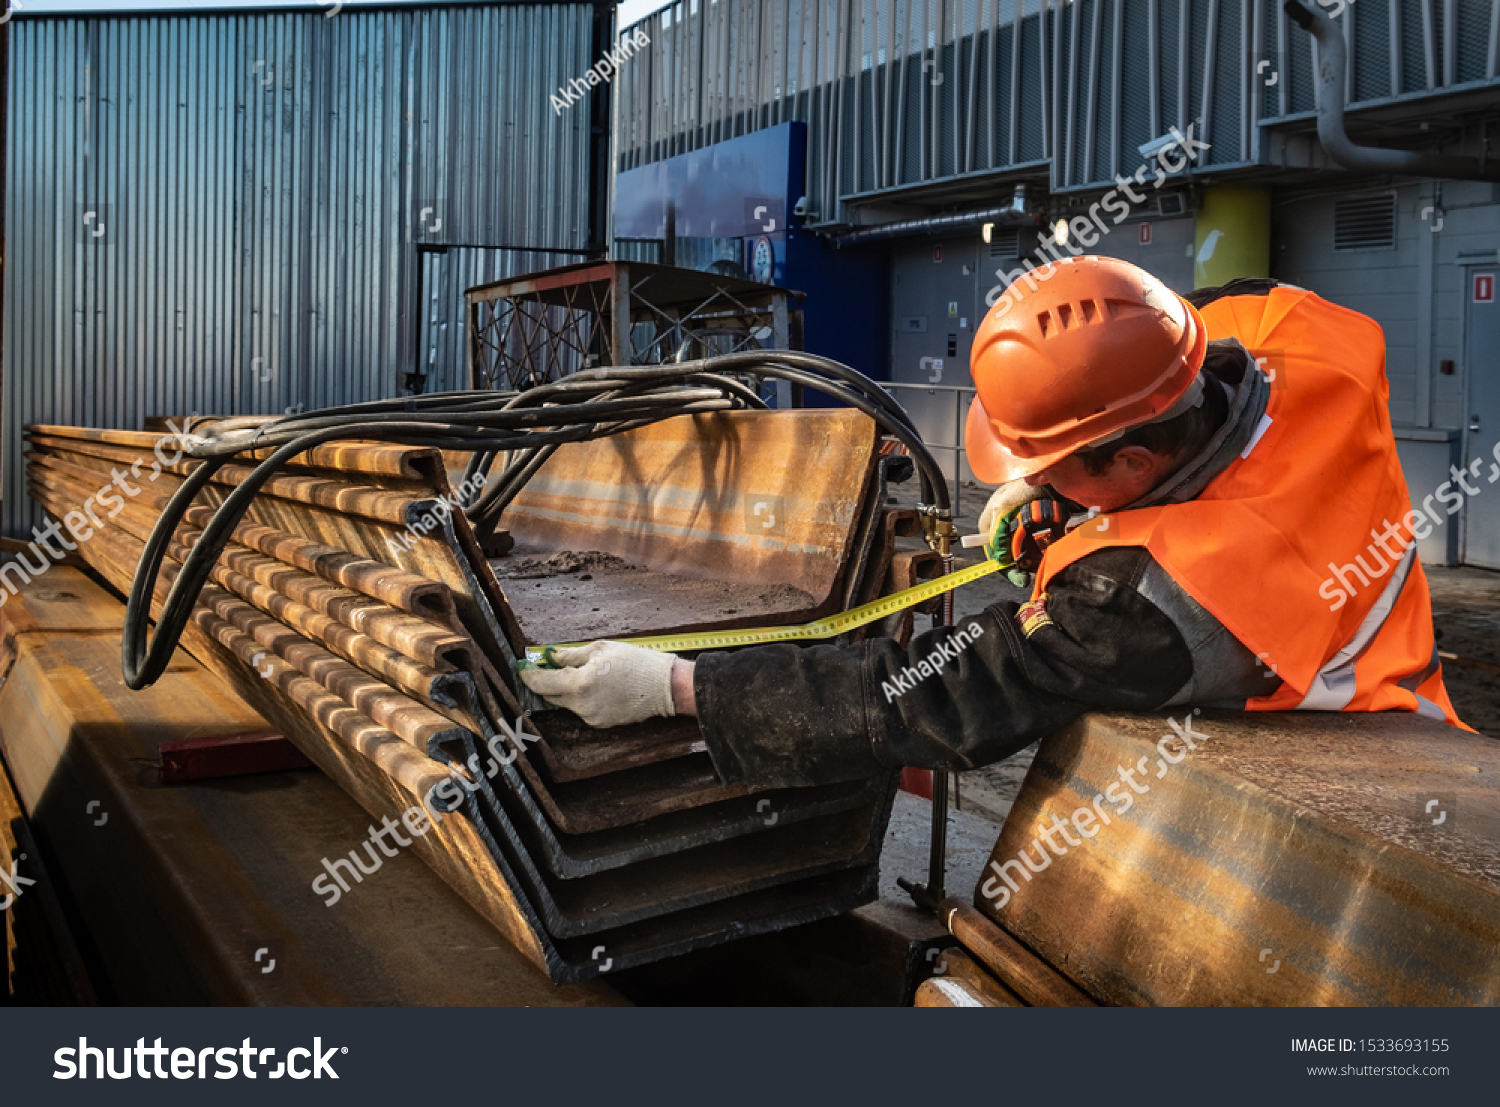 A man measures the size of a sheet pile Larsen. A worker at a construction site in a helmet fulfills his duties of sinking piles and complying with all standards. #1533693155